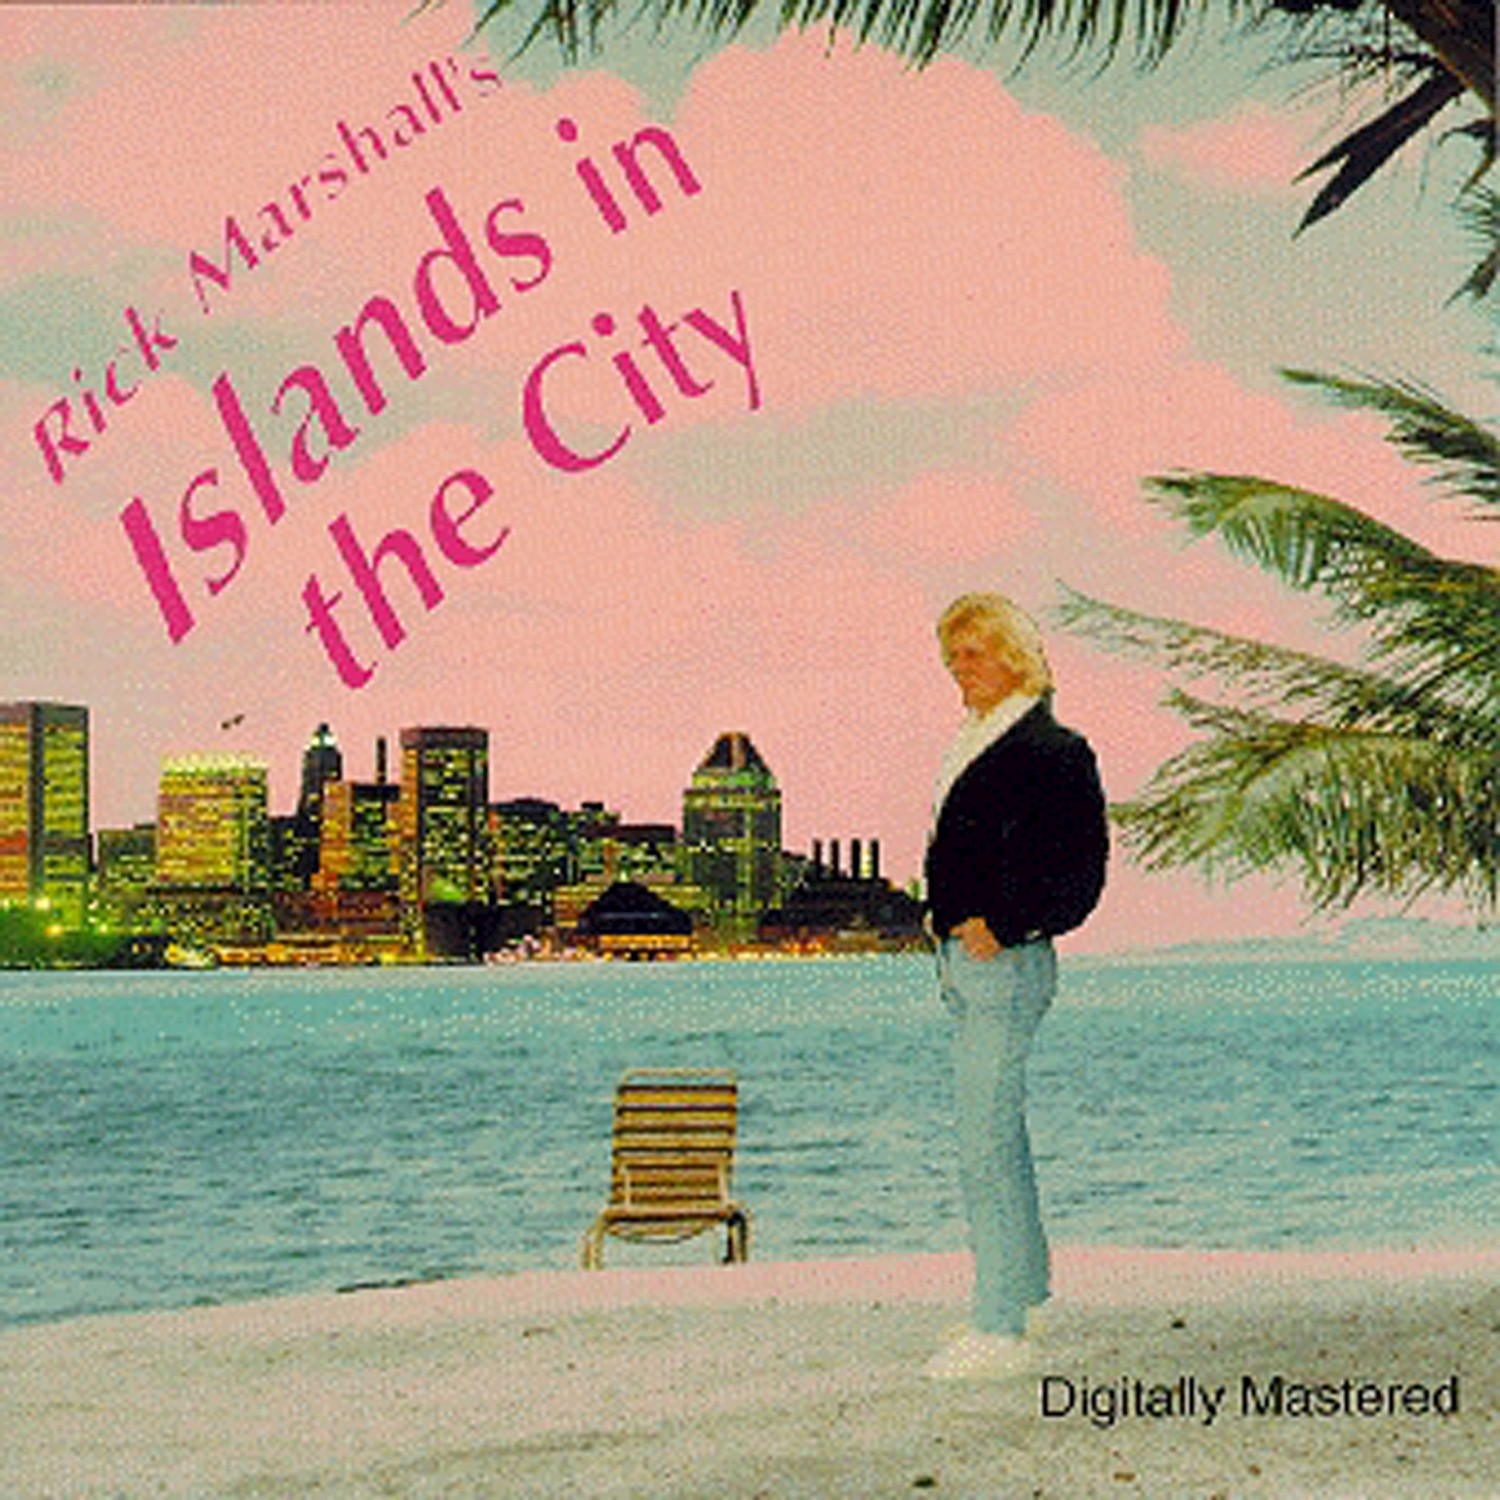 Islands in the City